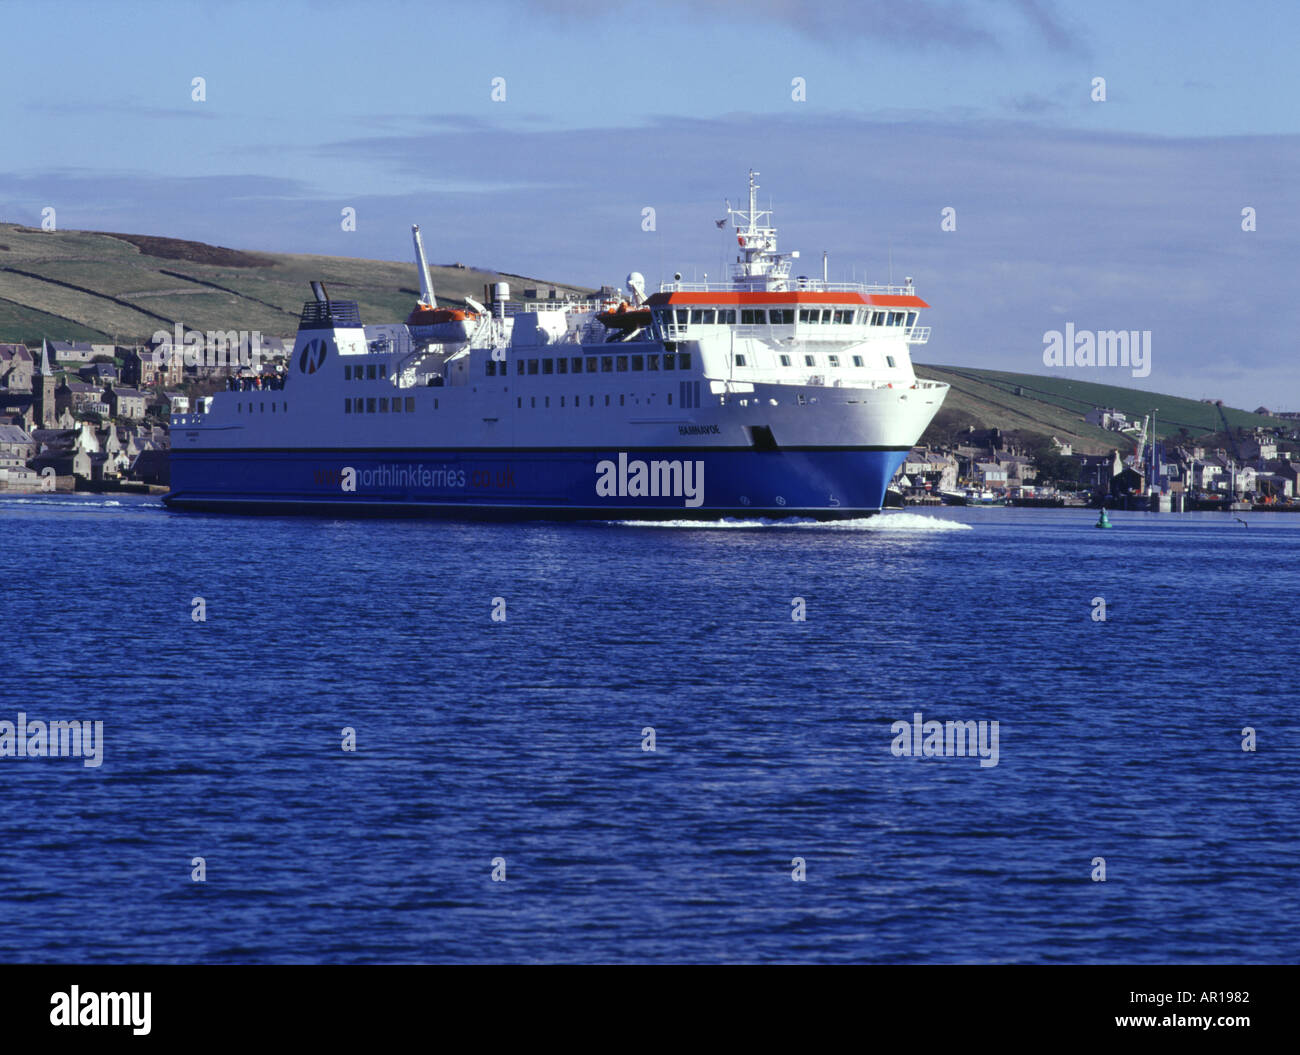 dh  STROMNESS ORKNEY MV Hamnavoe Northlink ro ro ferry departing harbour town waterfront Stock Photo